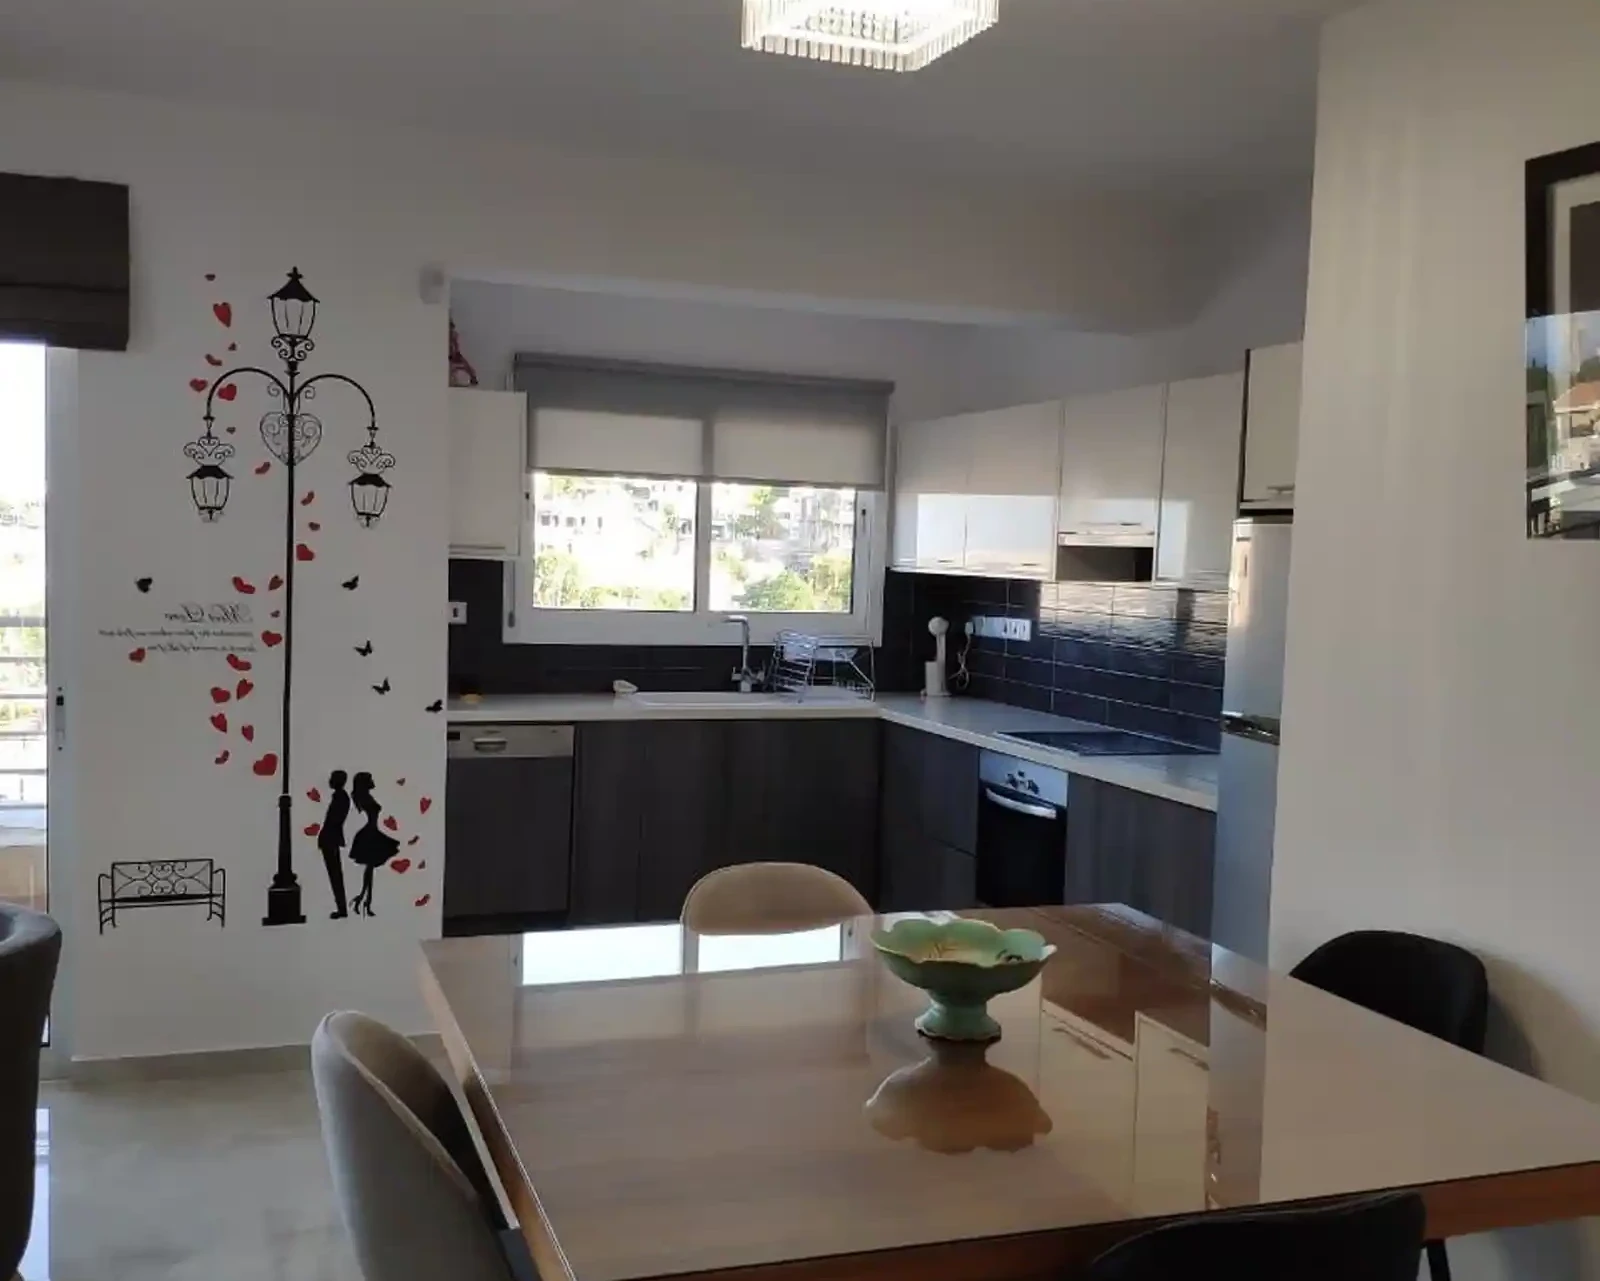 2-bedroom apartment to rent €1.500, image 1